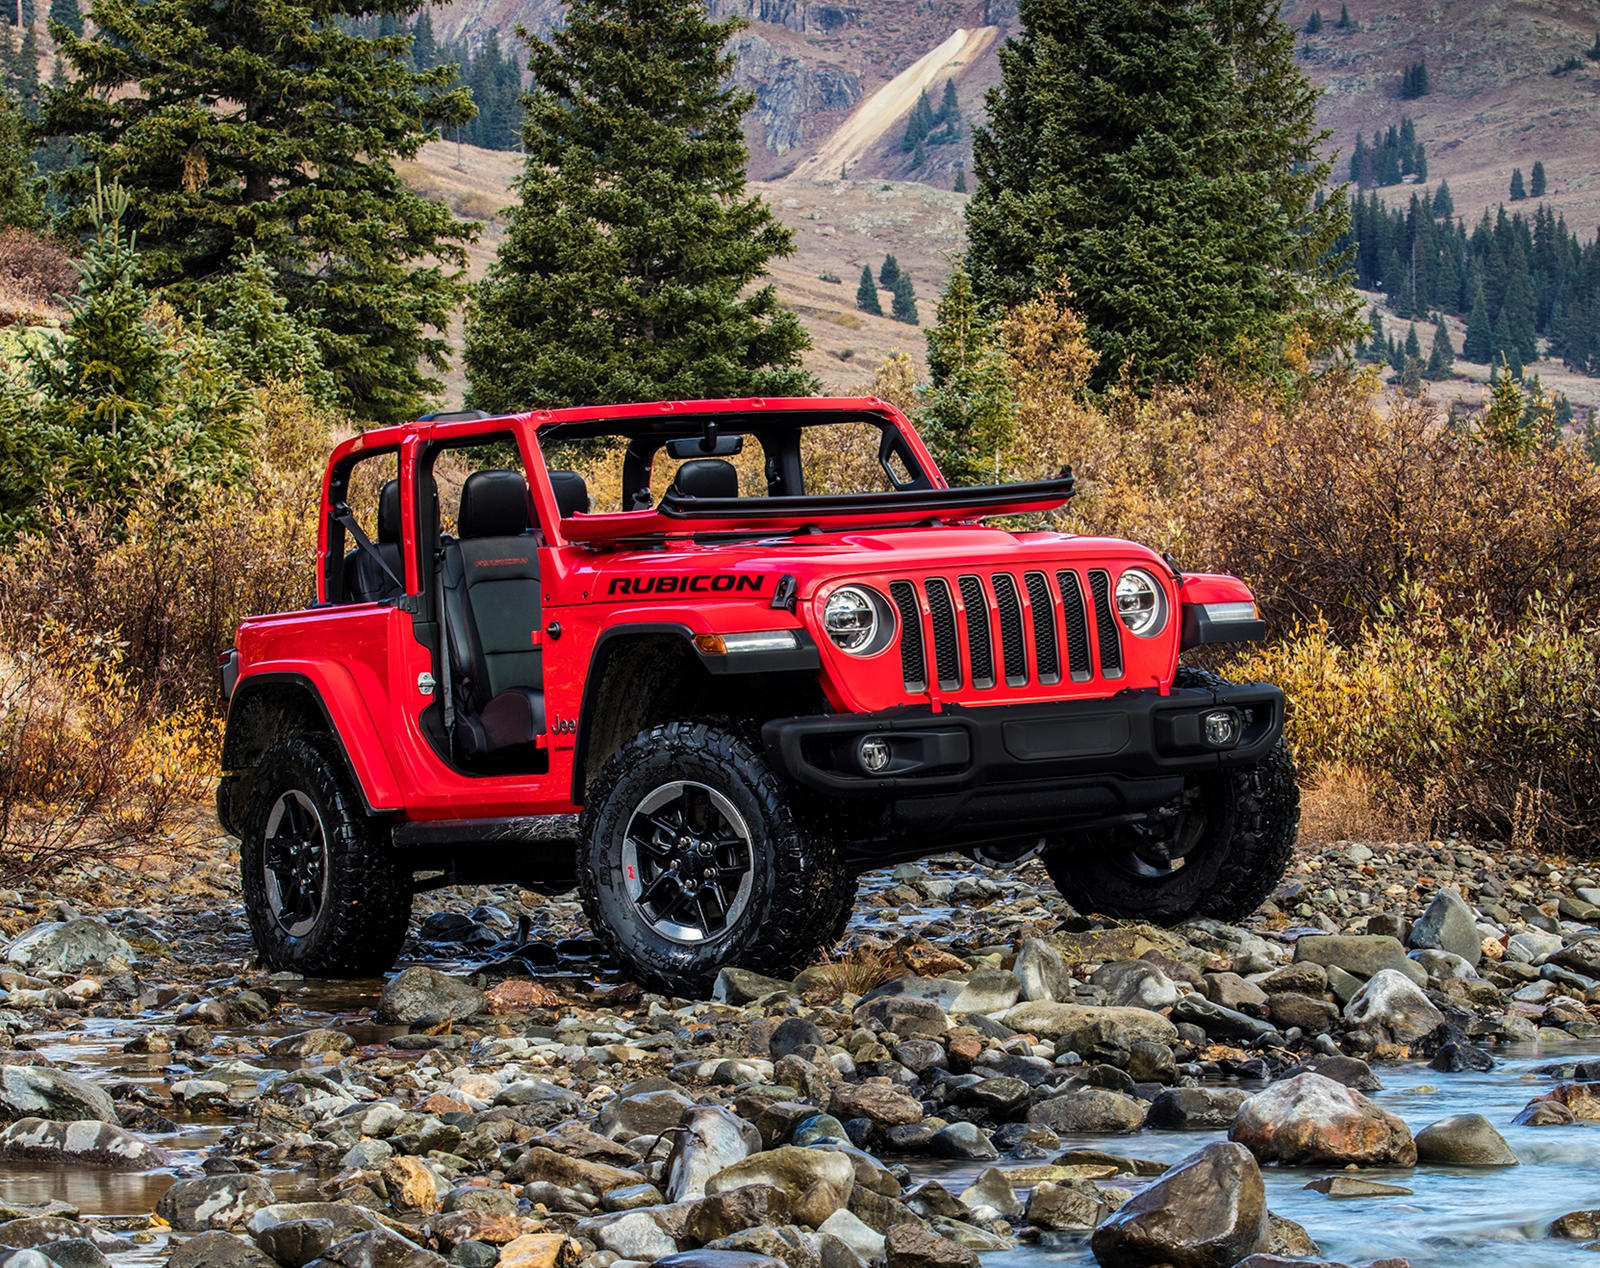 2020 Jeep Wrangler Lease Prices Are Very Attractive Right Now | CarBuzz